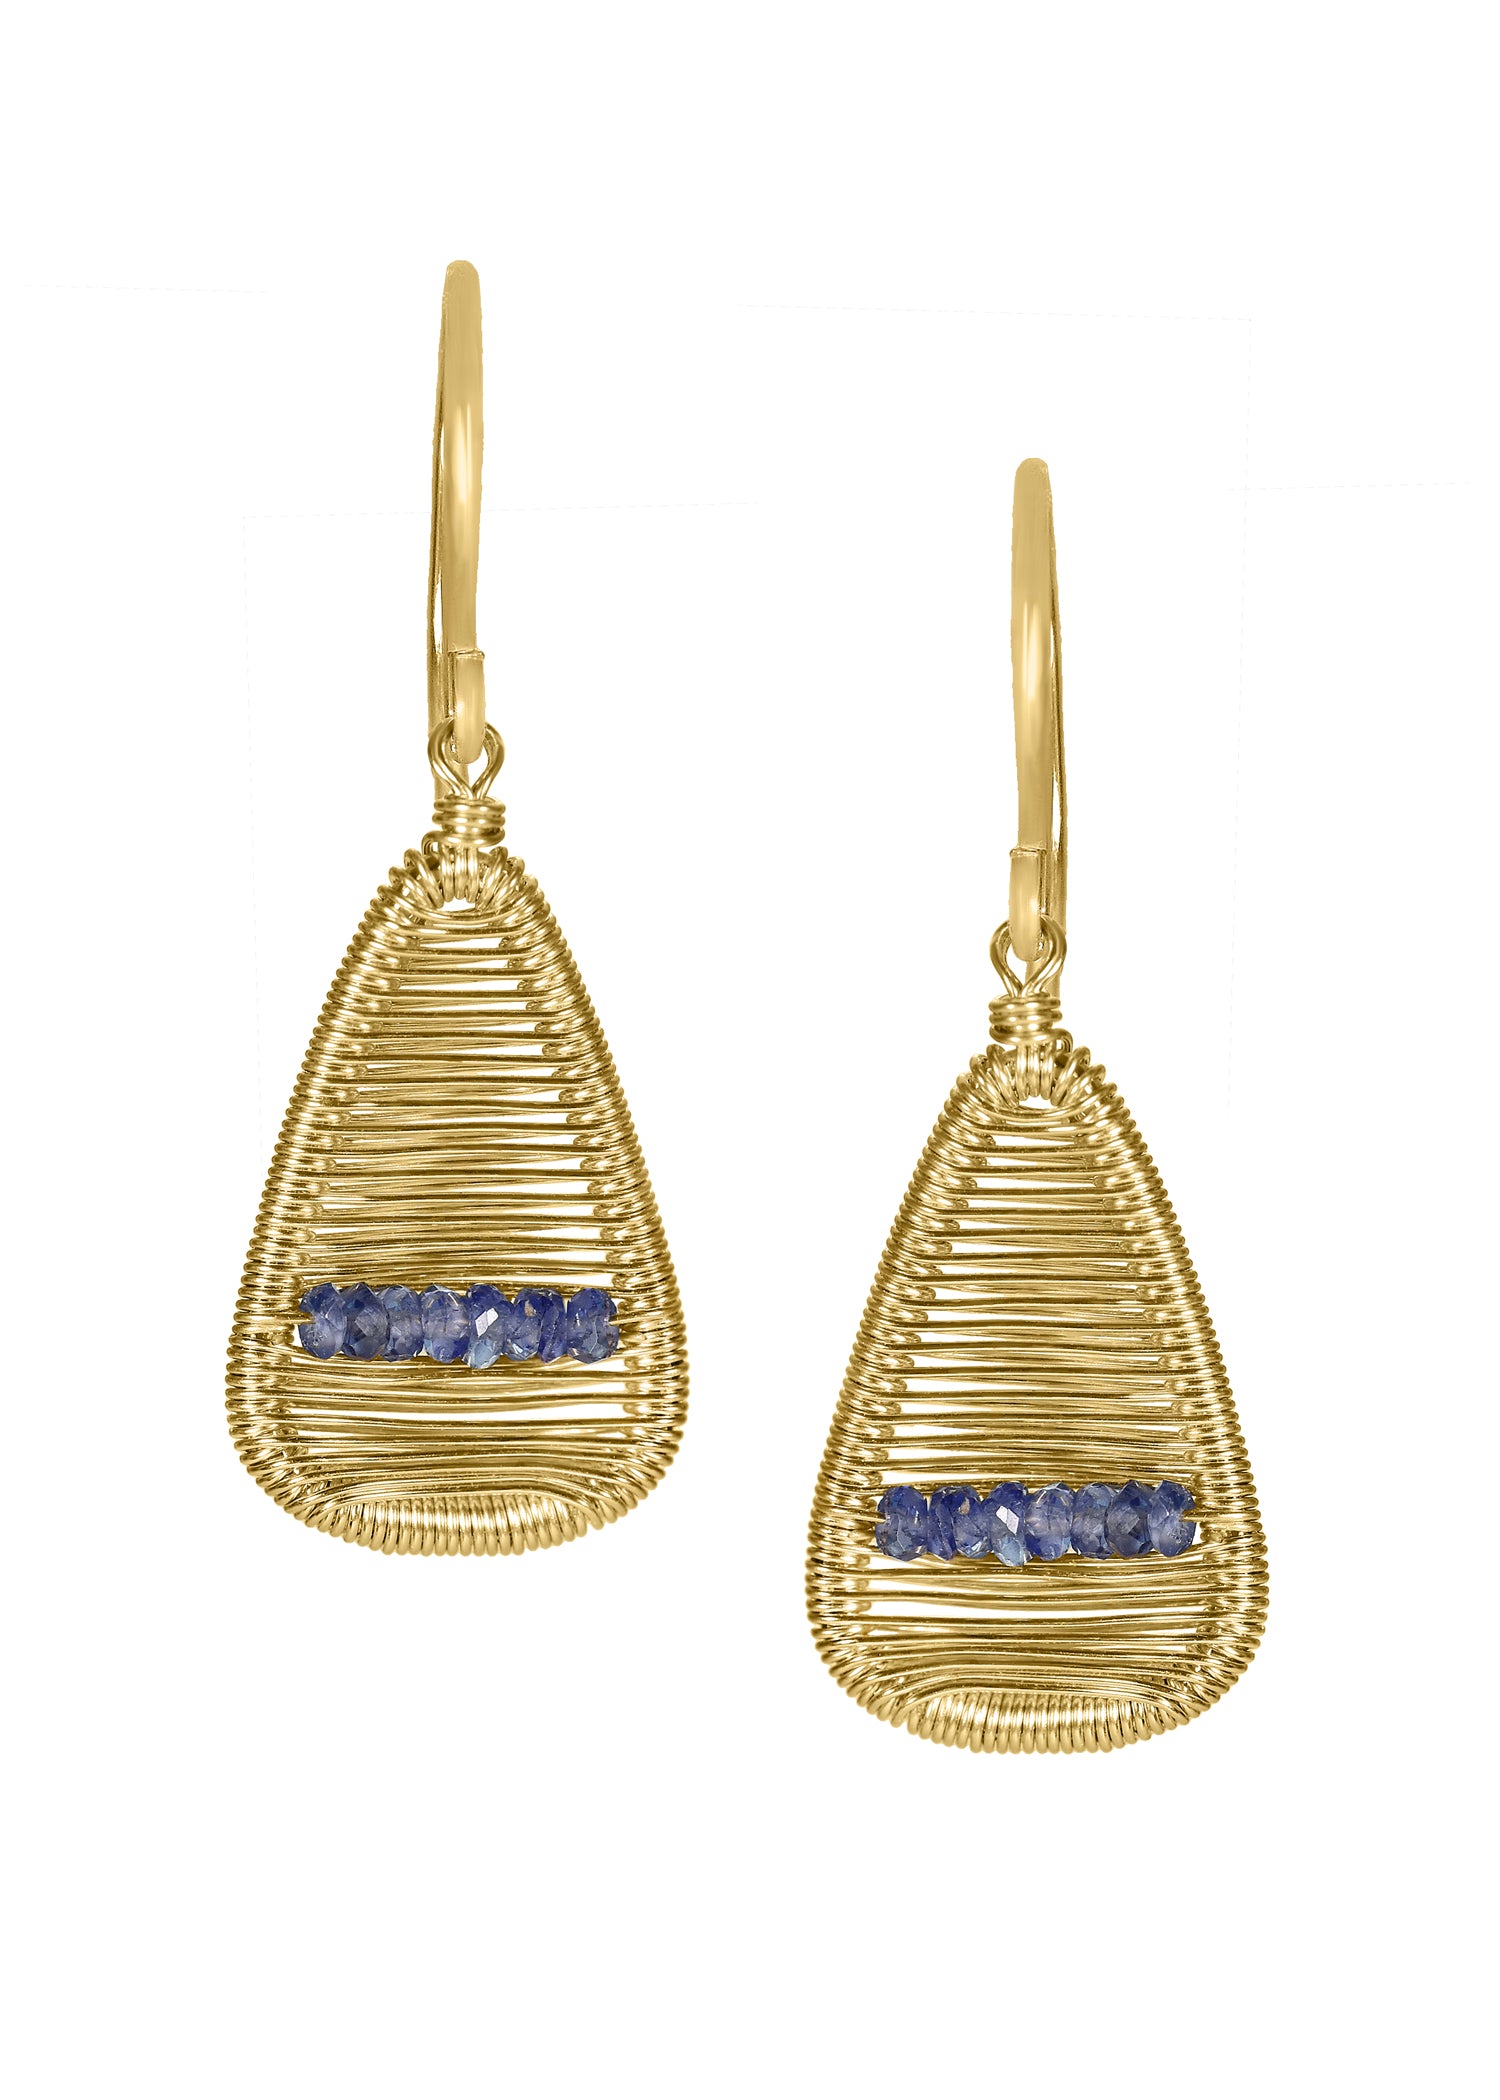 Blue sapphire 14k gold fill Earrings measure 1-1/8" in length (including ear wires) and 1/2" in width at the widest point Handmade in our Los Angeles studio